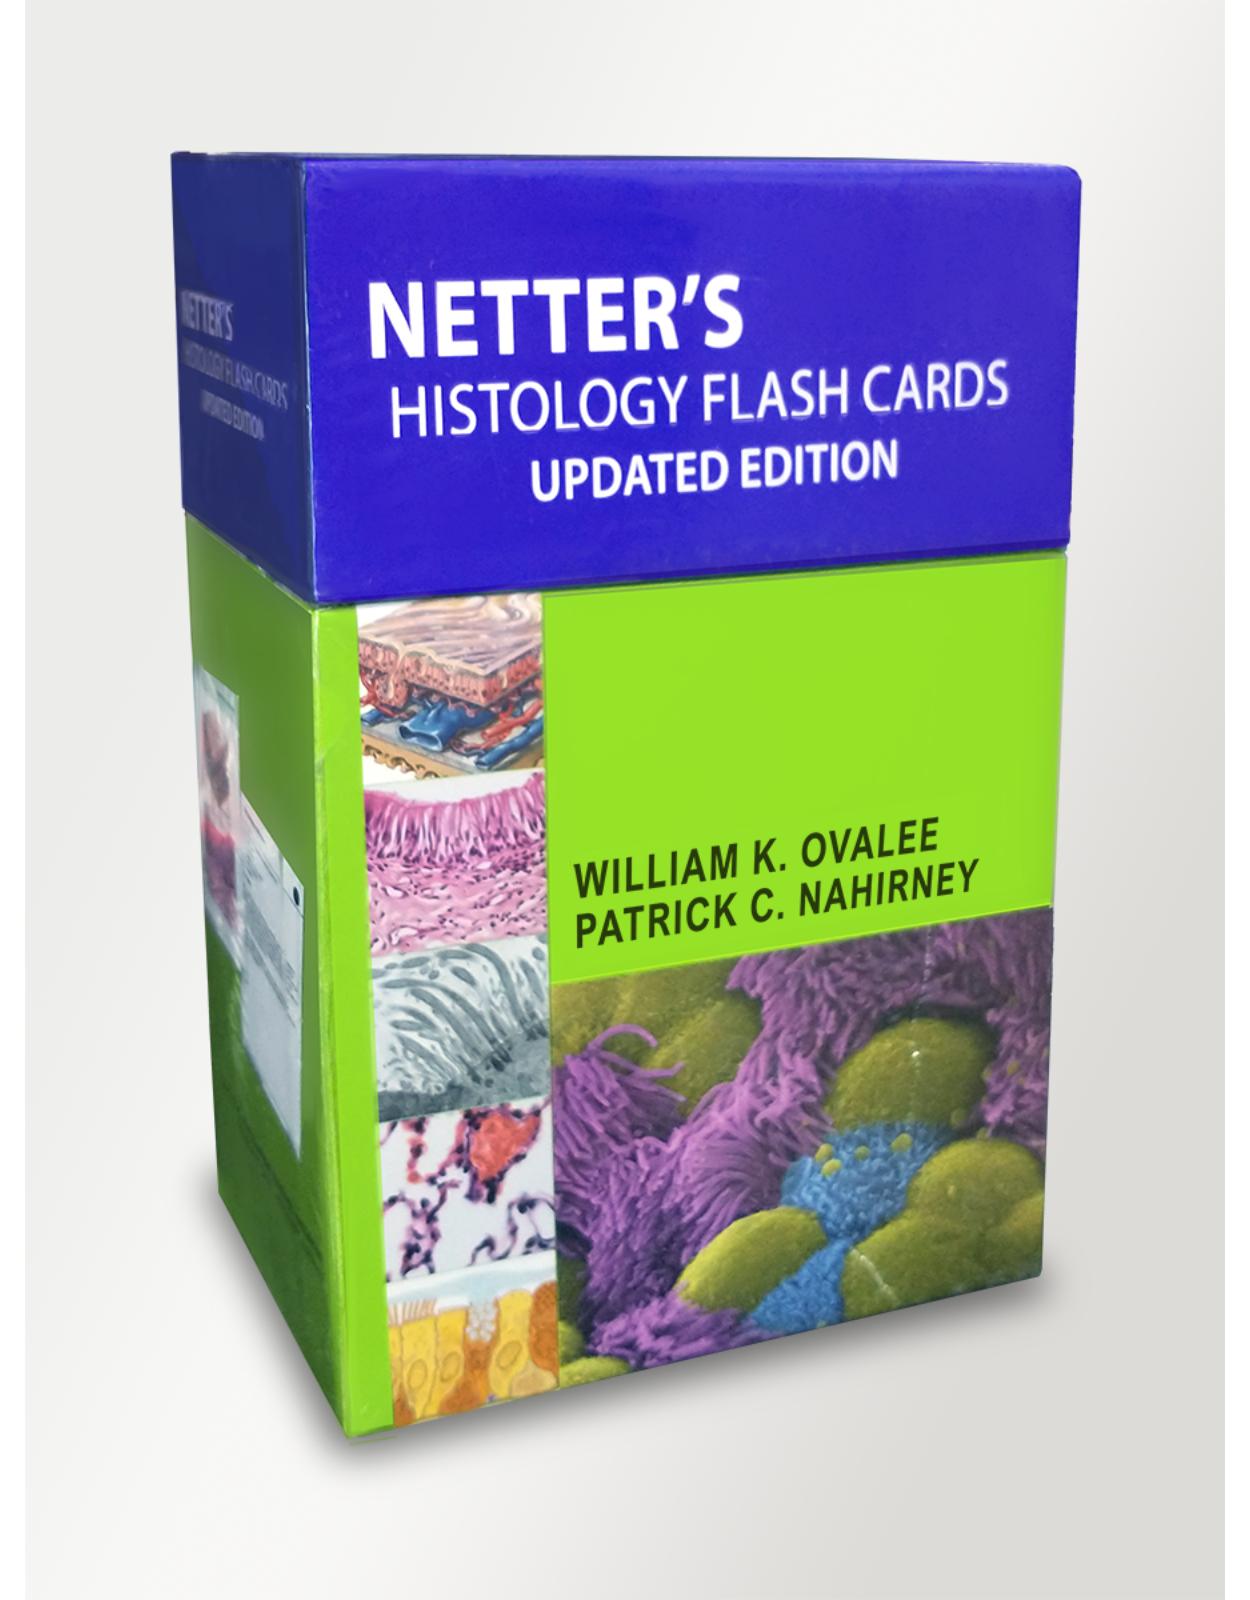 Netter's Histology Flash Cards, Updated Edition